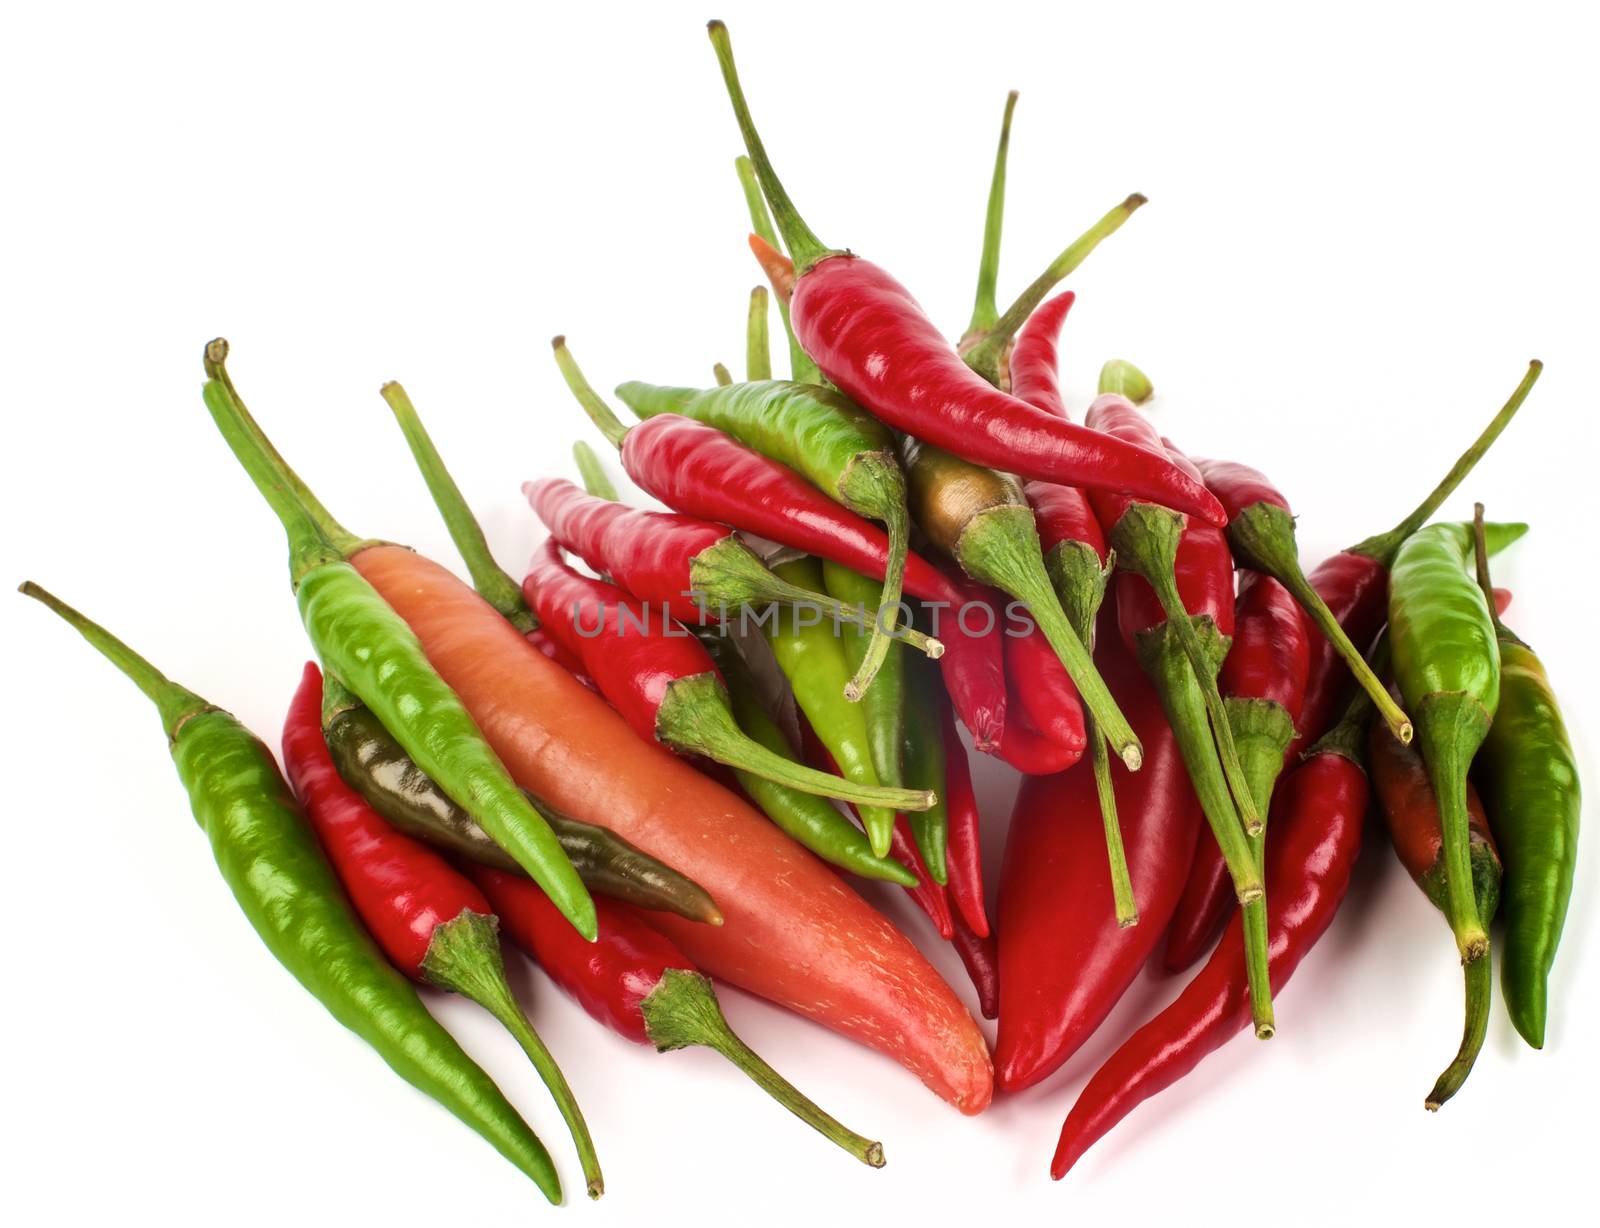 Stack of Chili Peppers by zhekos